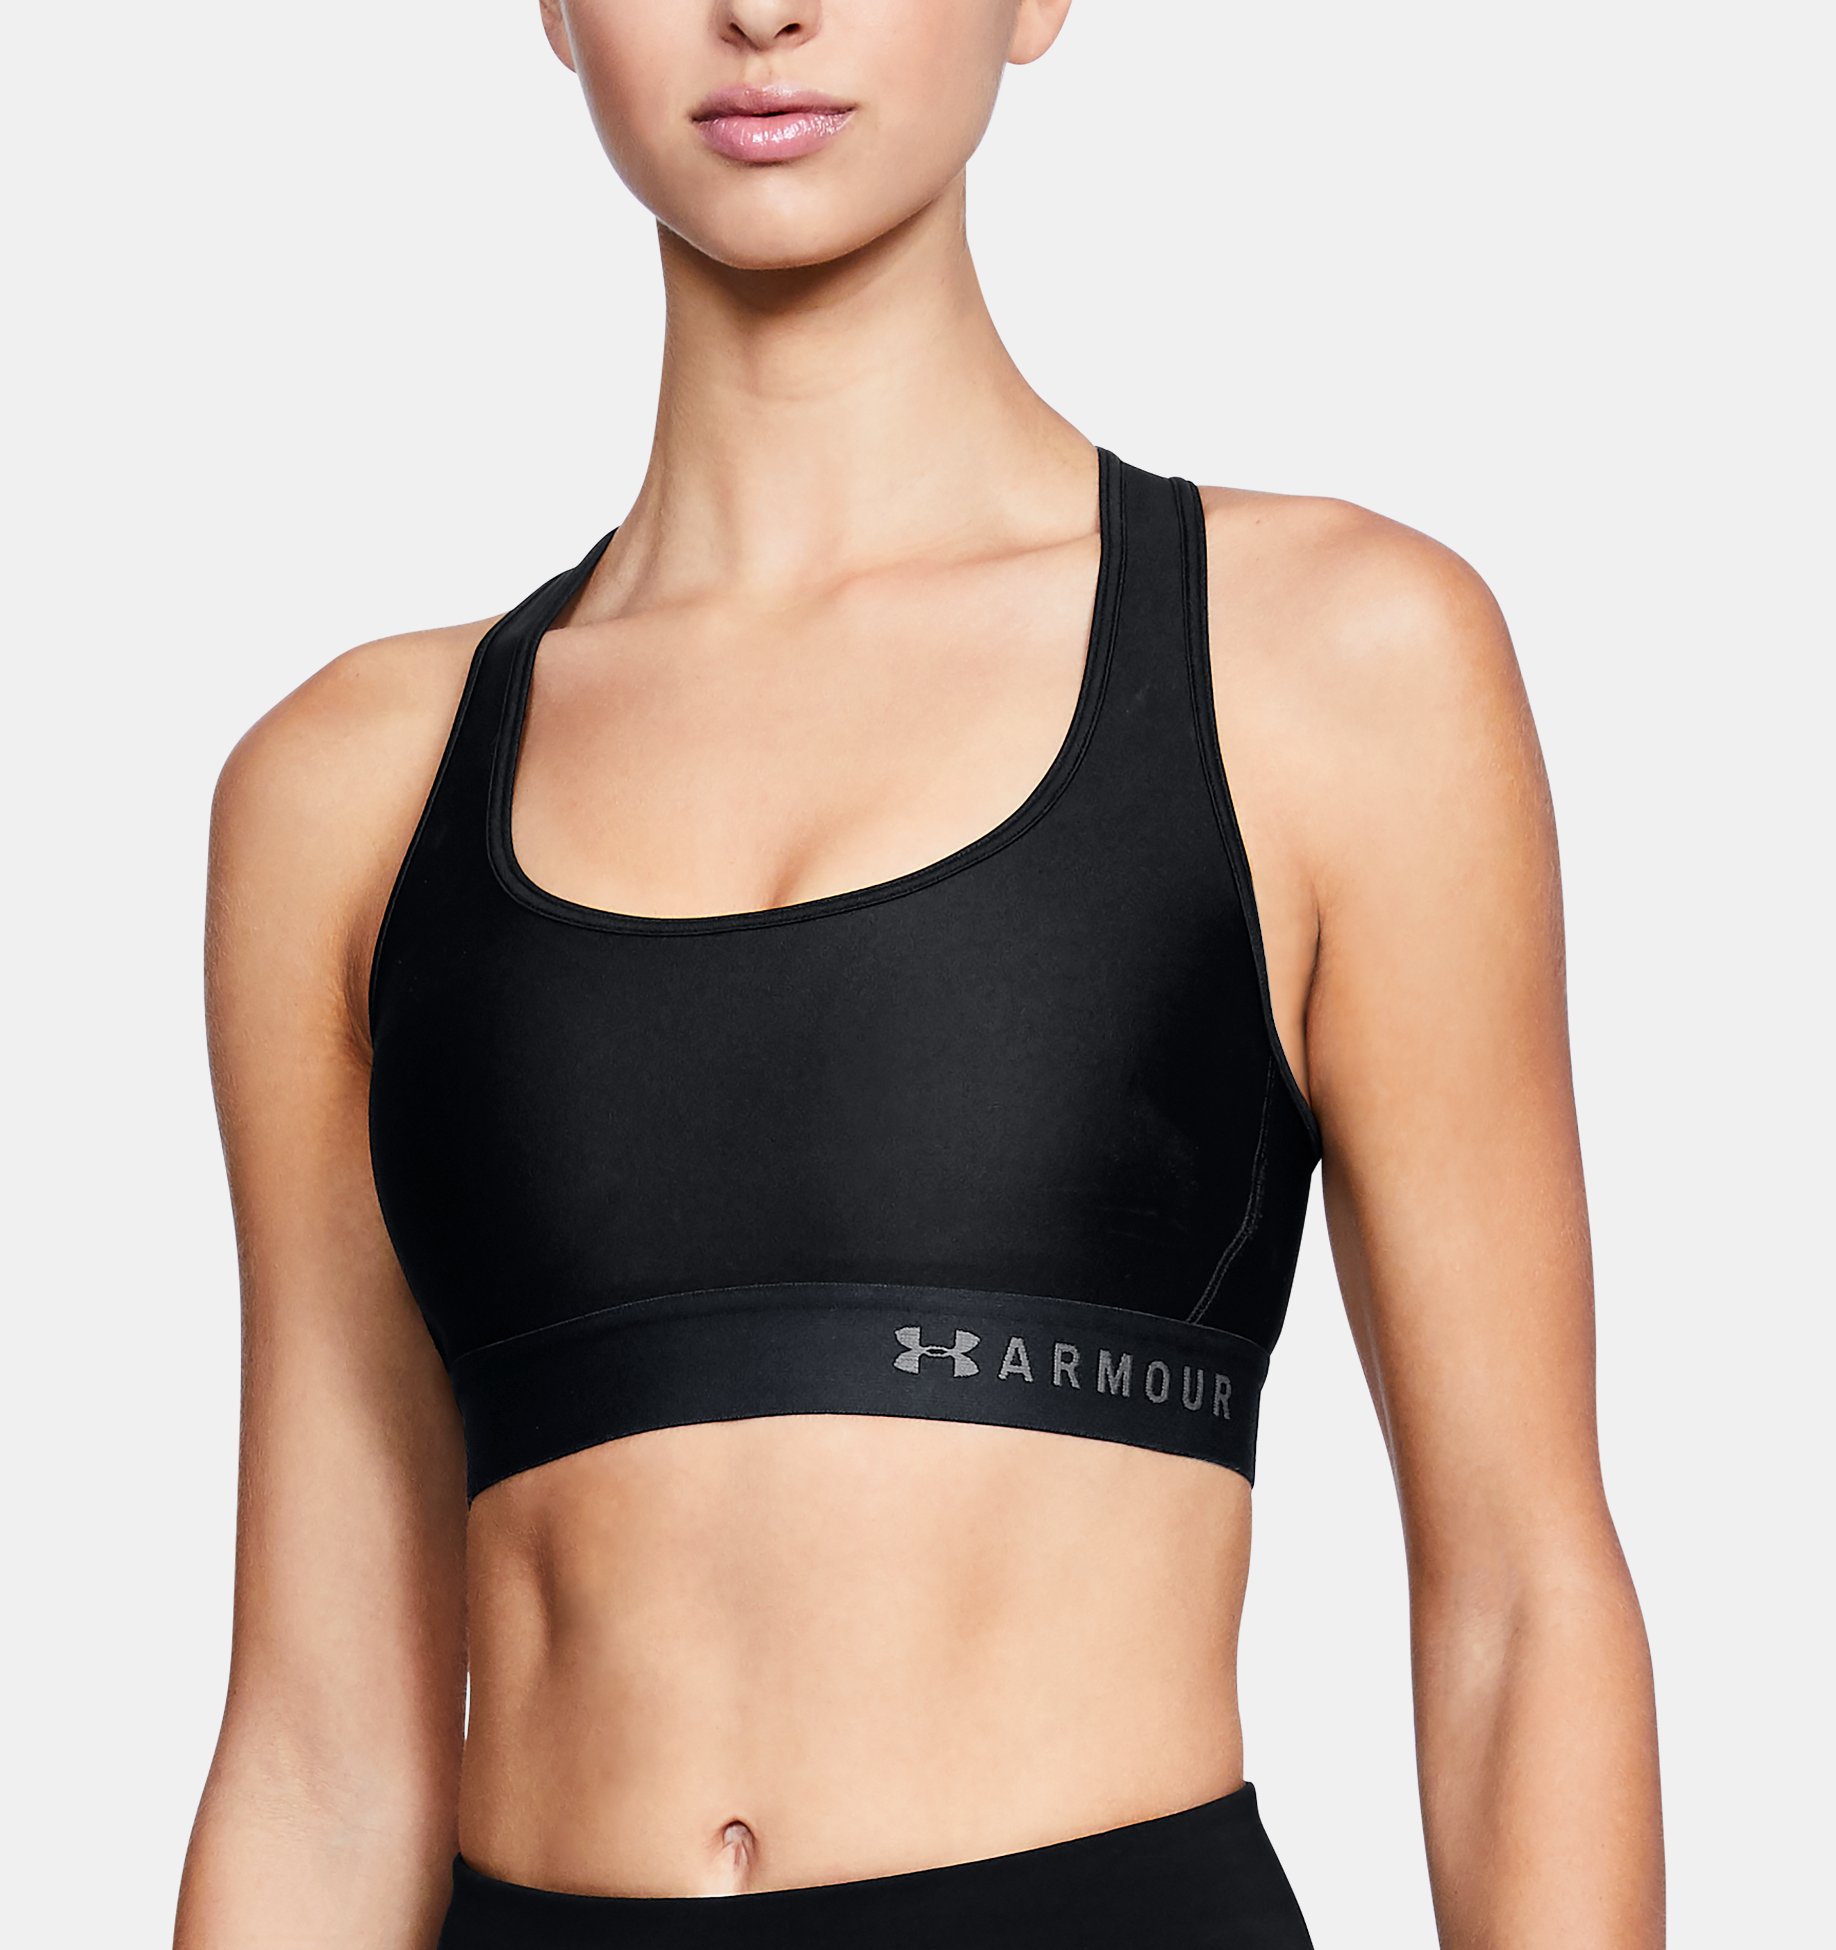 Under Armour Women's Armour Mid Crossback Sports Bra (3 colors) $14 + free shipping